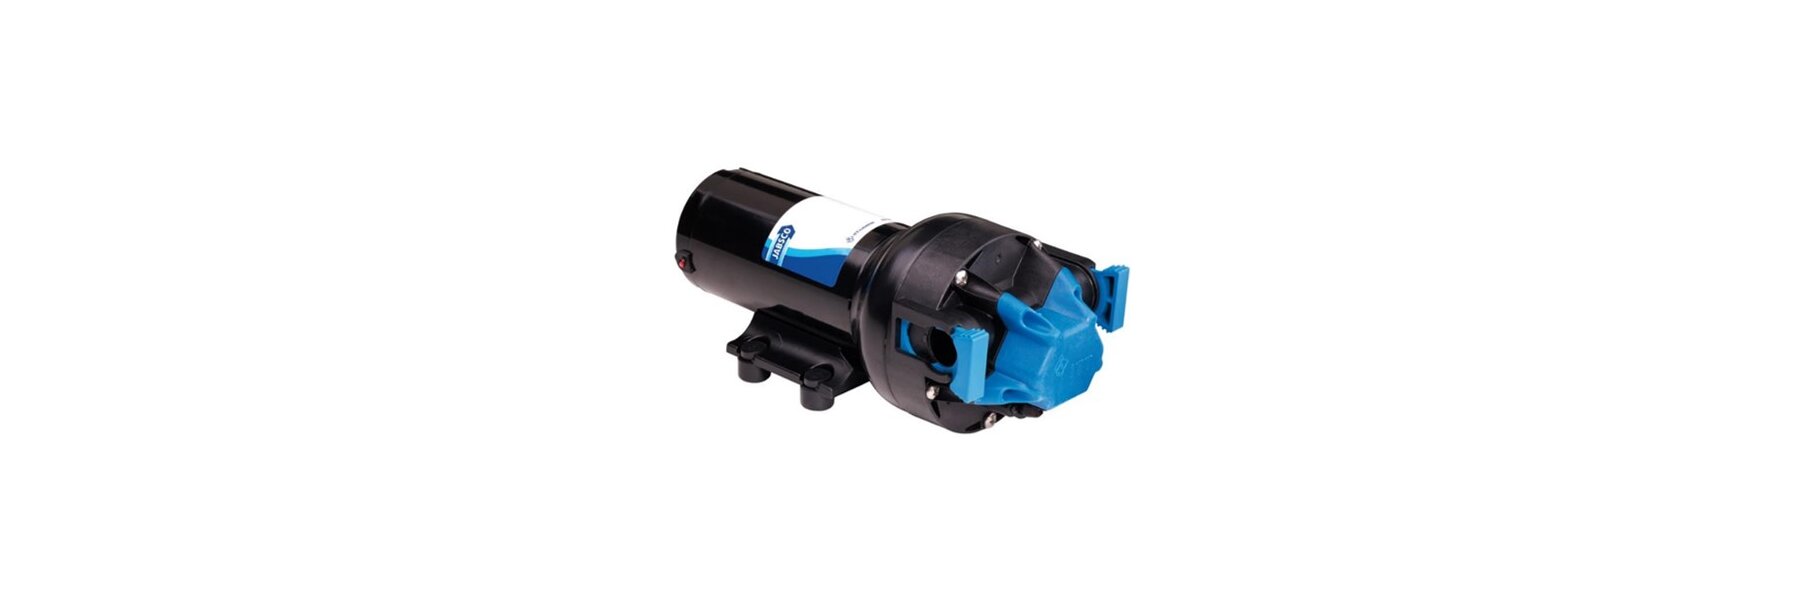 SPX Johnson Pump: Water pressure systems and spare parts - buy online